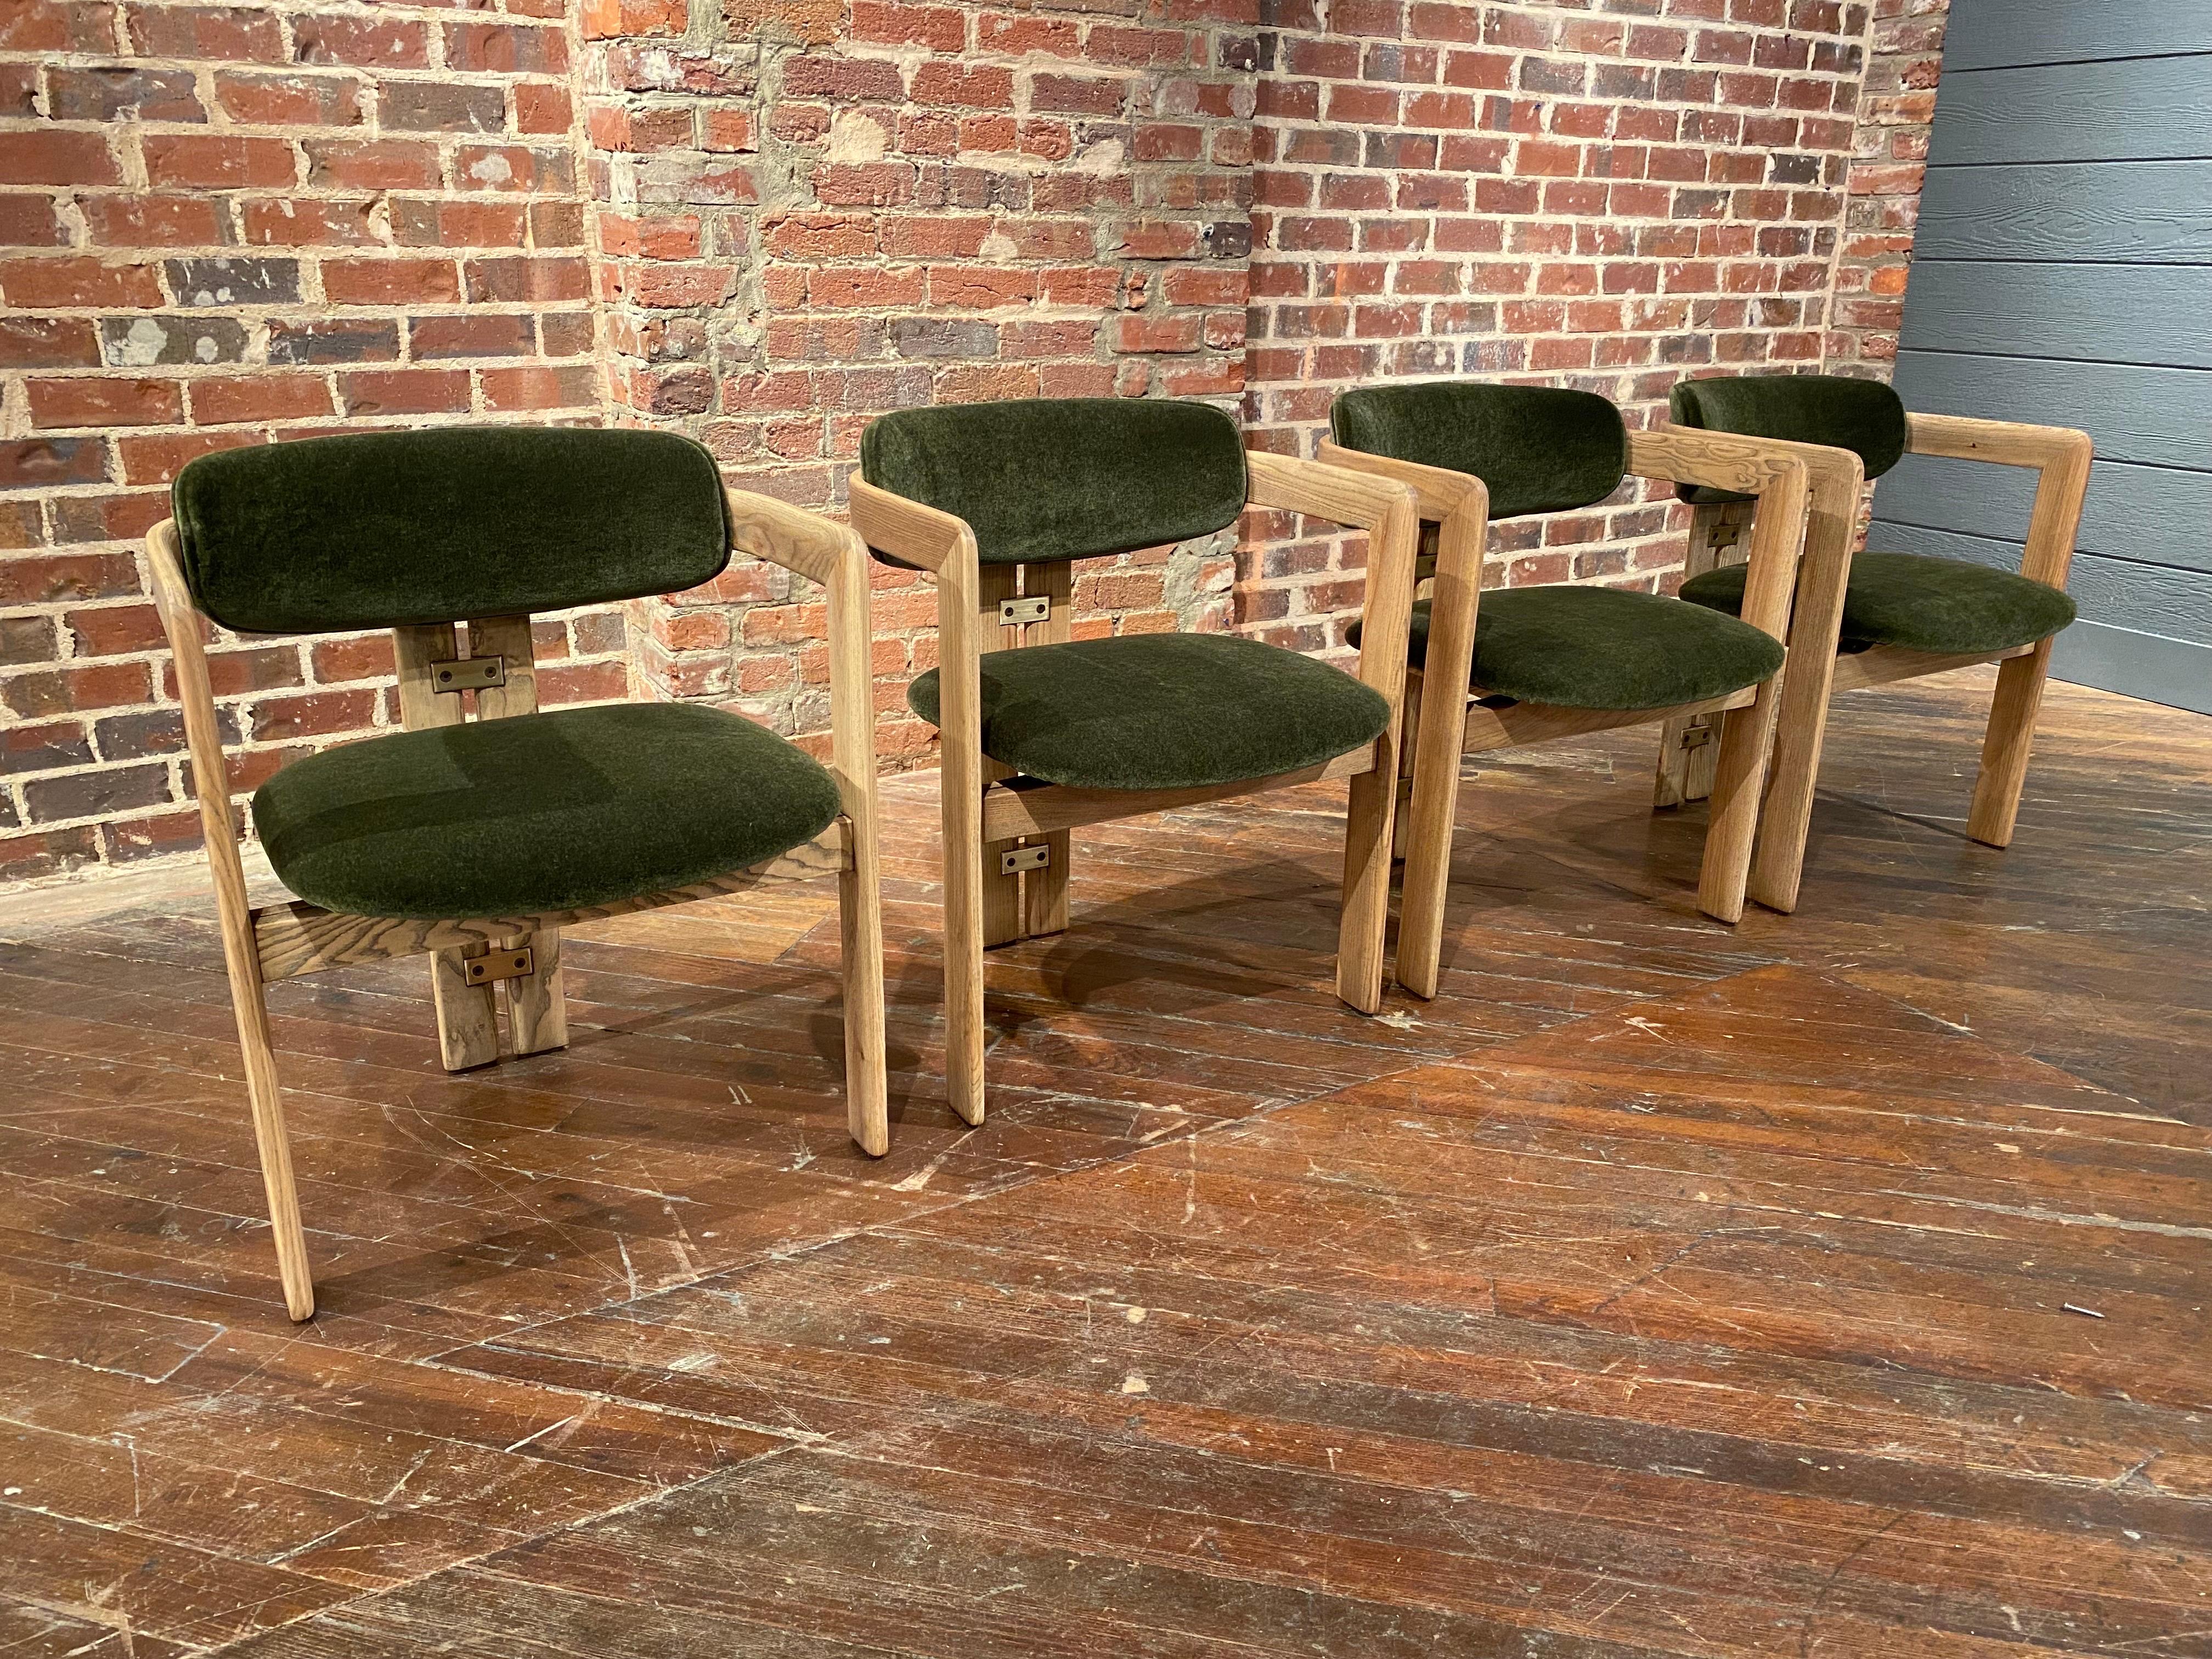 An incredible set of four dining chairs by Augusto Savini.  Pamplona dining chairs produced by Pozzi in Italy circa 1960.  These have solid ash frames with new mohair velvet upholstery.  A striking minimal design newly refinished, updated   and